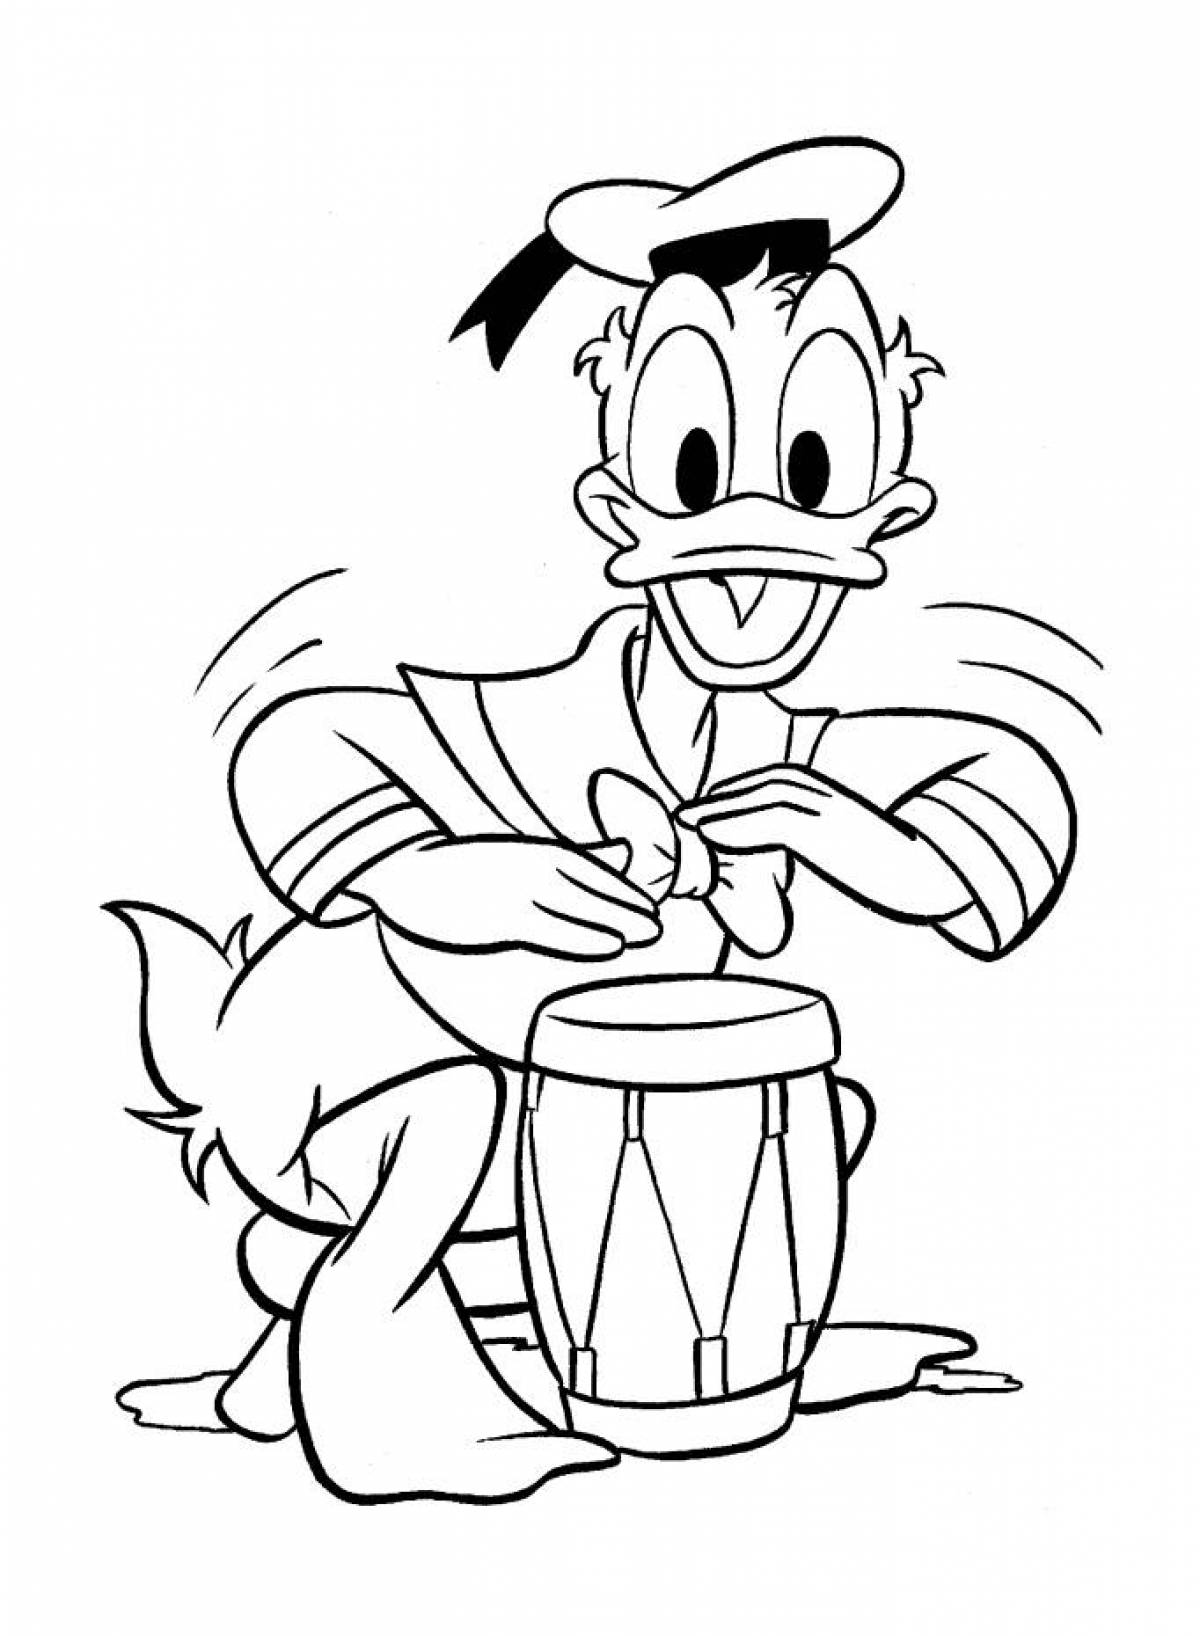 Photo Donald plays the drum